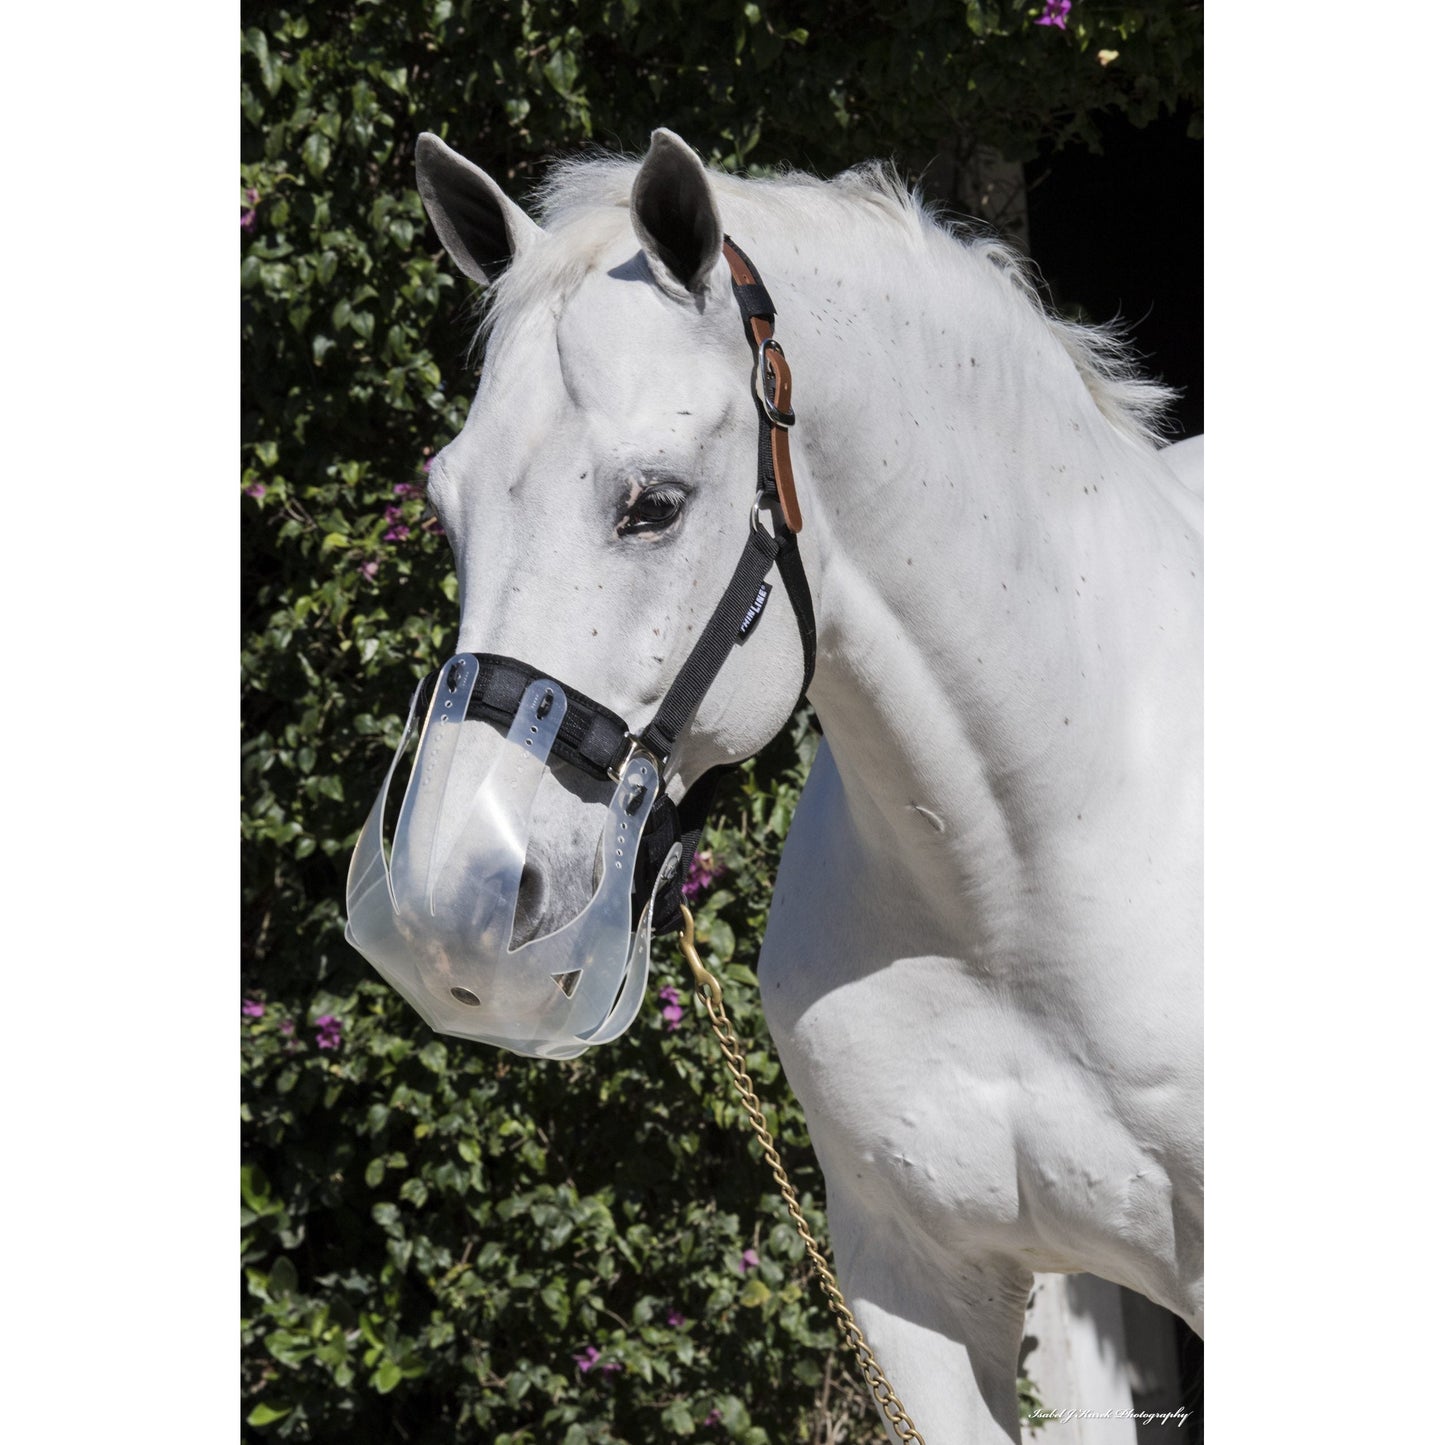 A white horse with a breakaway halter, standing before bushes.